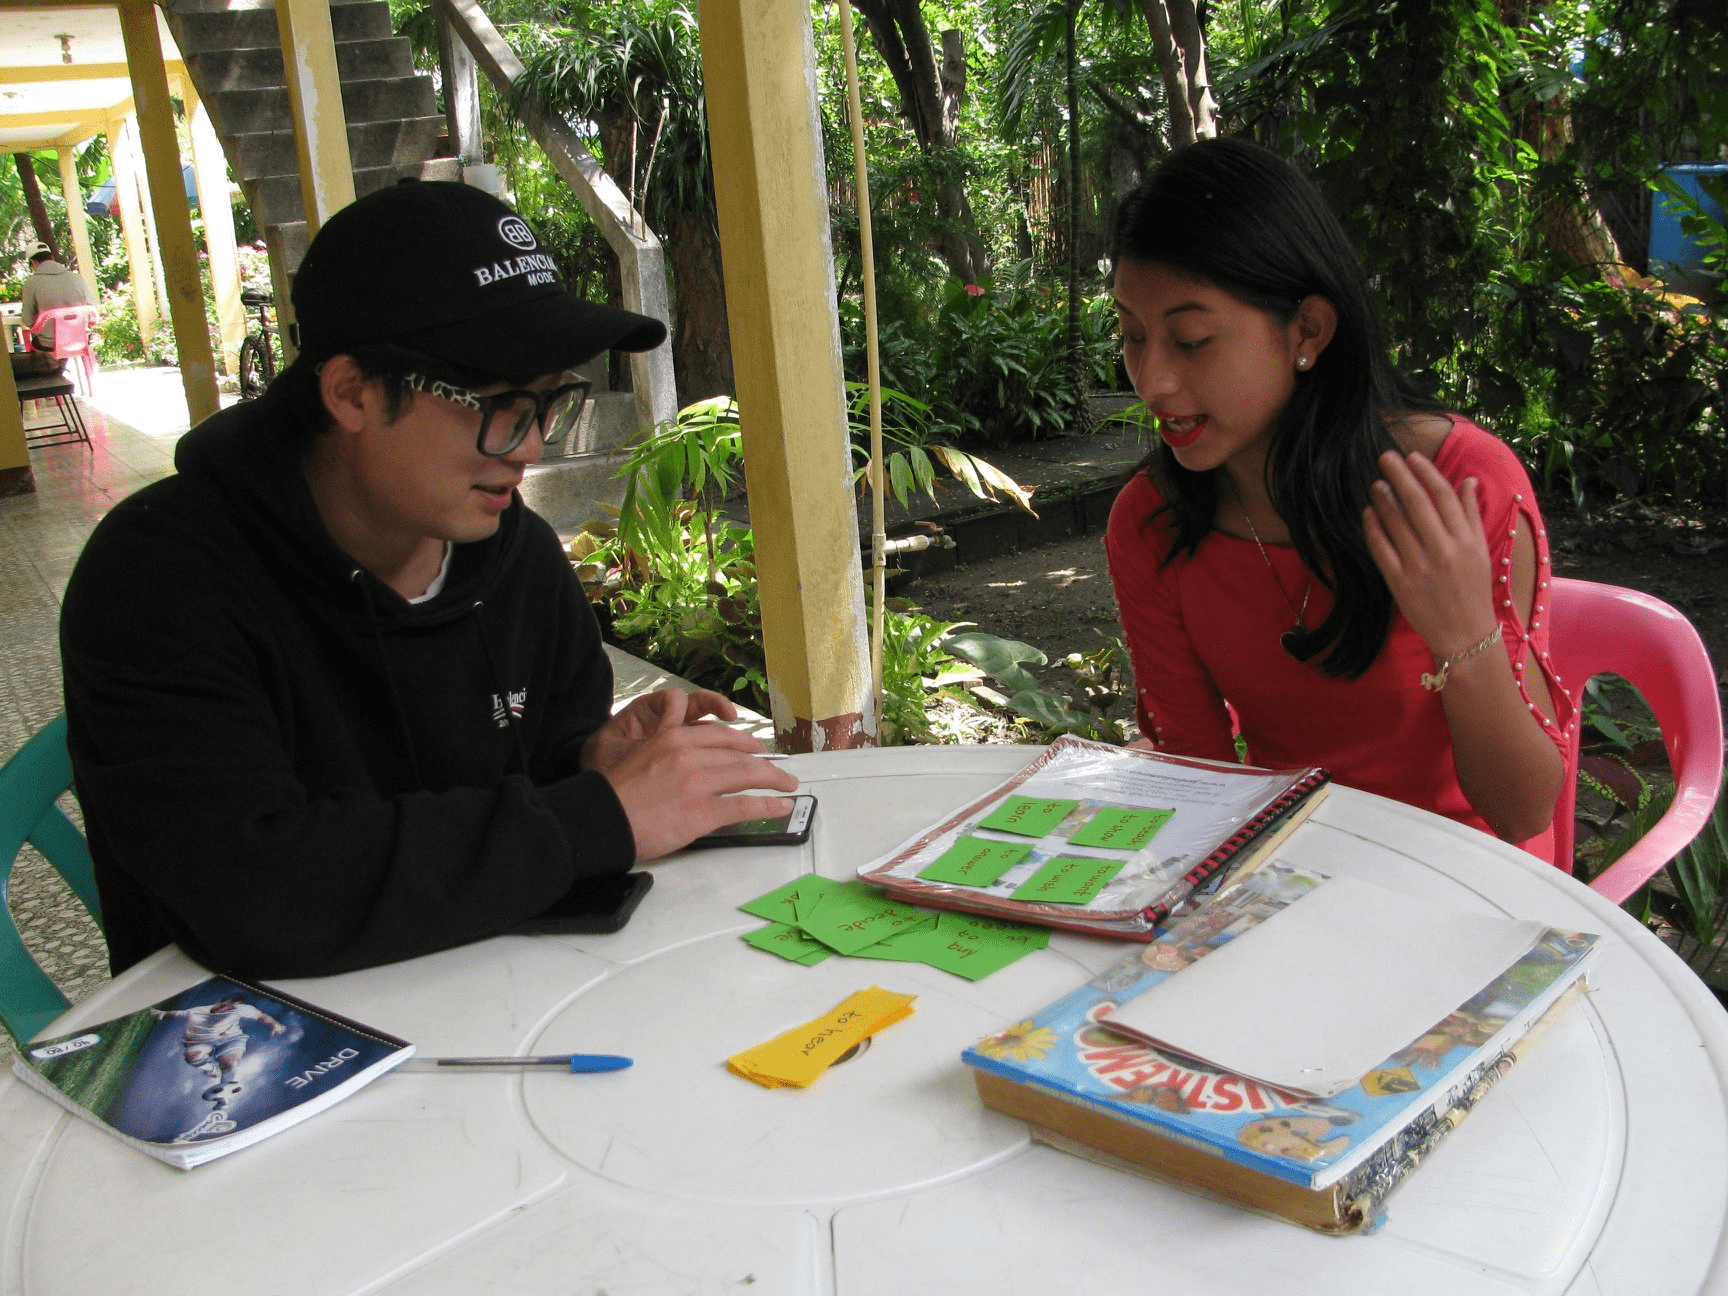 Two people sat around a table looking at study materials.